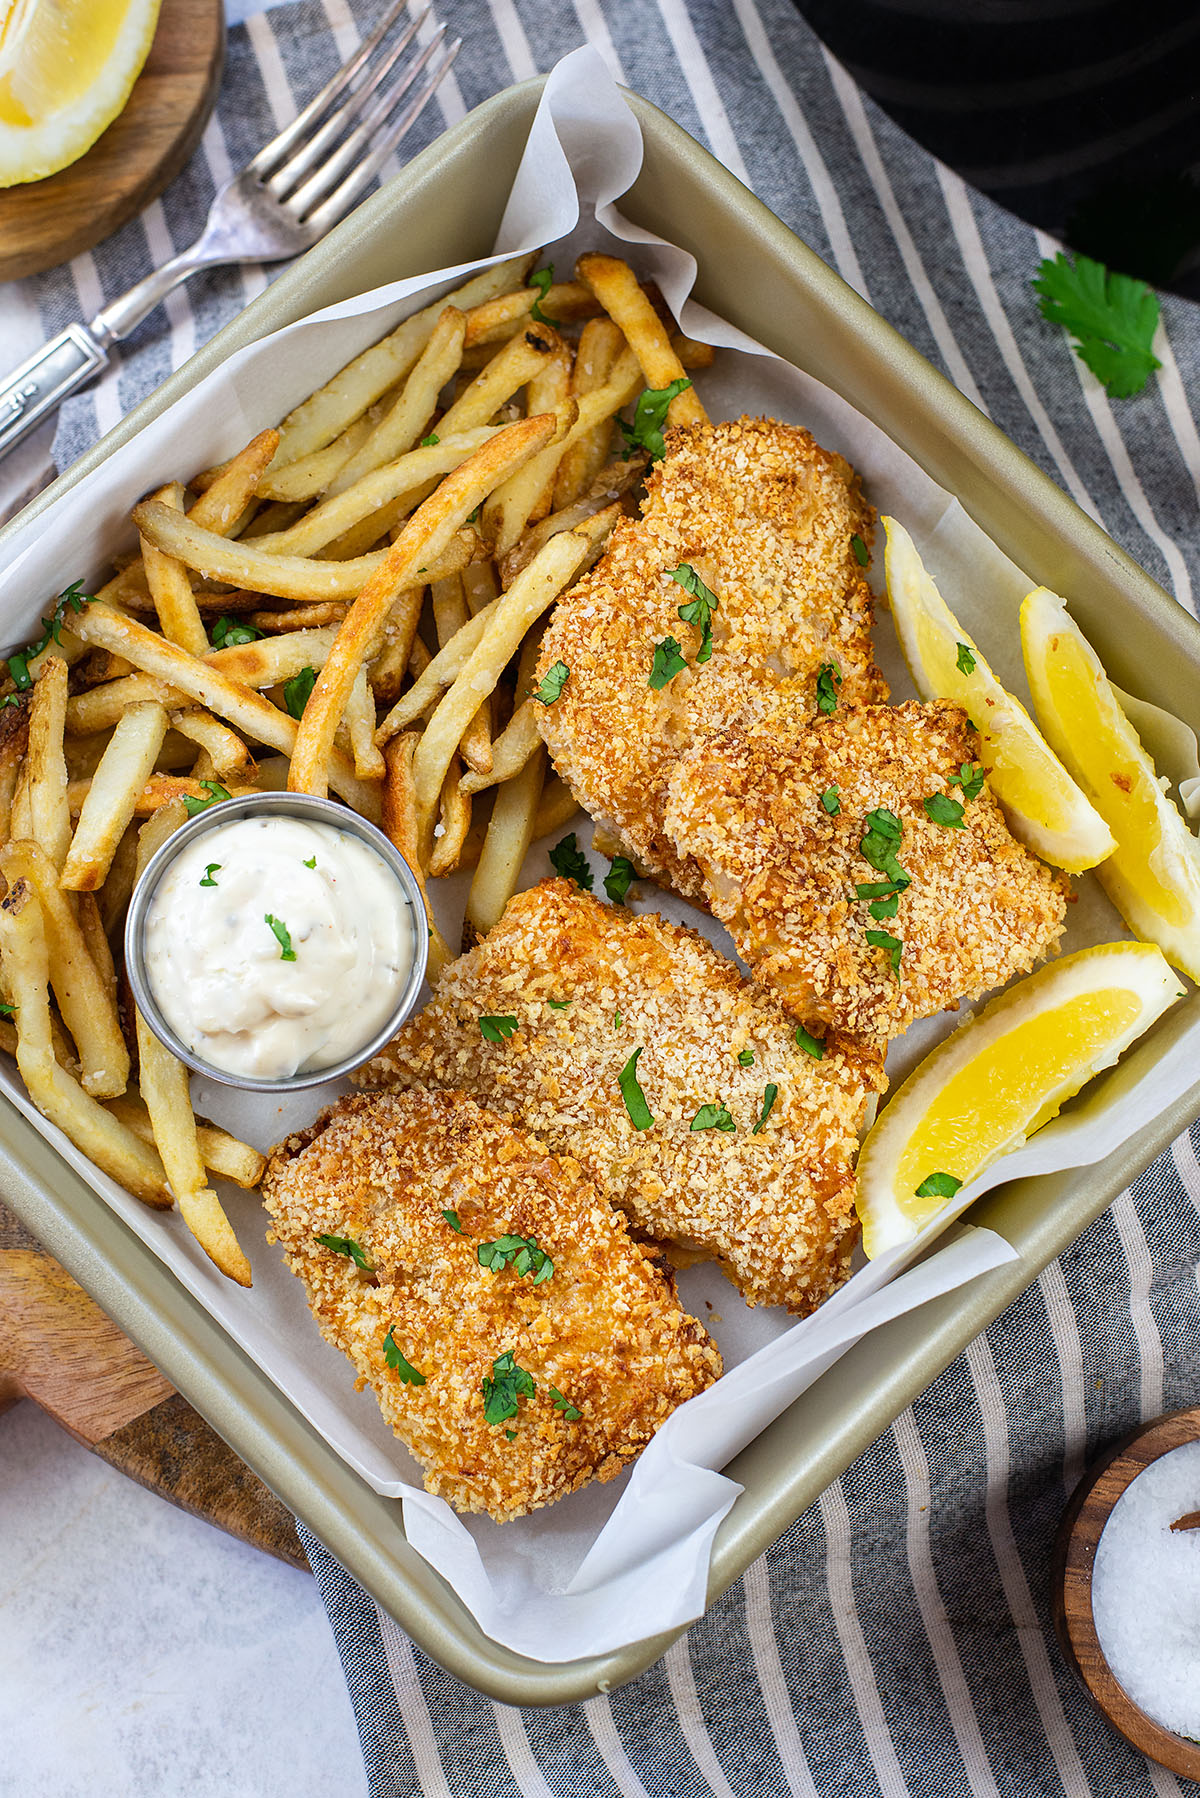 A square plate with fries, fish, and lemon wedges on it.